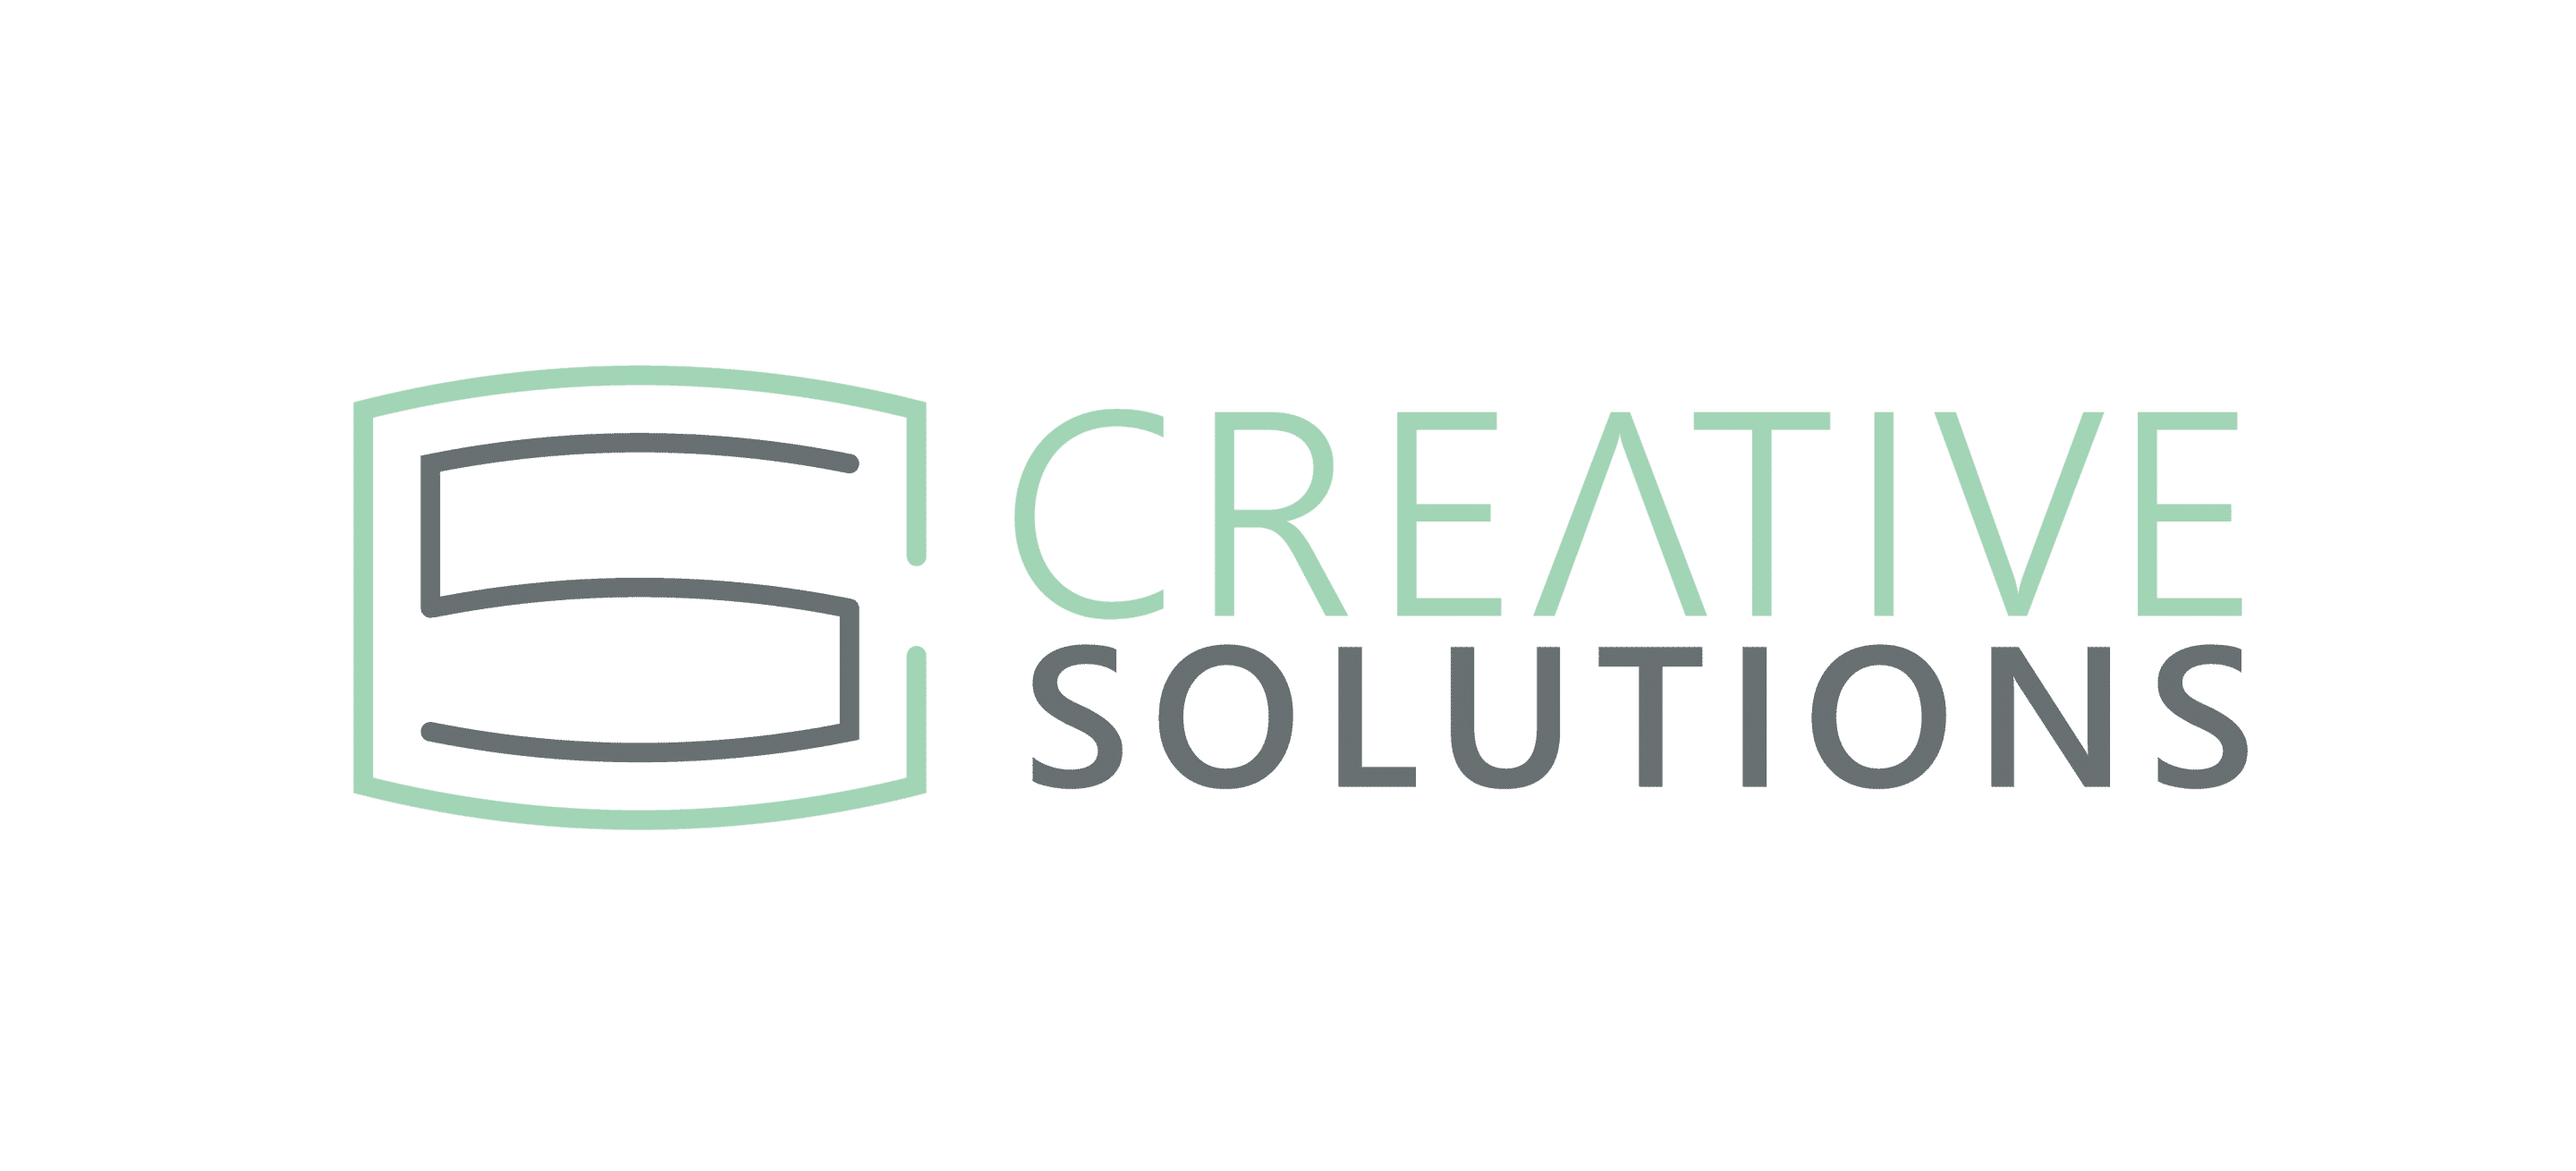 Creative Solutions Logo lrg - Digital Marketing Tools and Tips to build sustainability during COVID-19 - April 29 Newmarket Chamber of Commerce